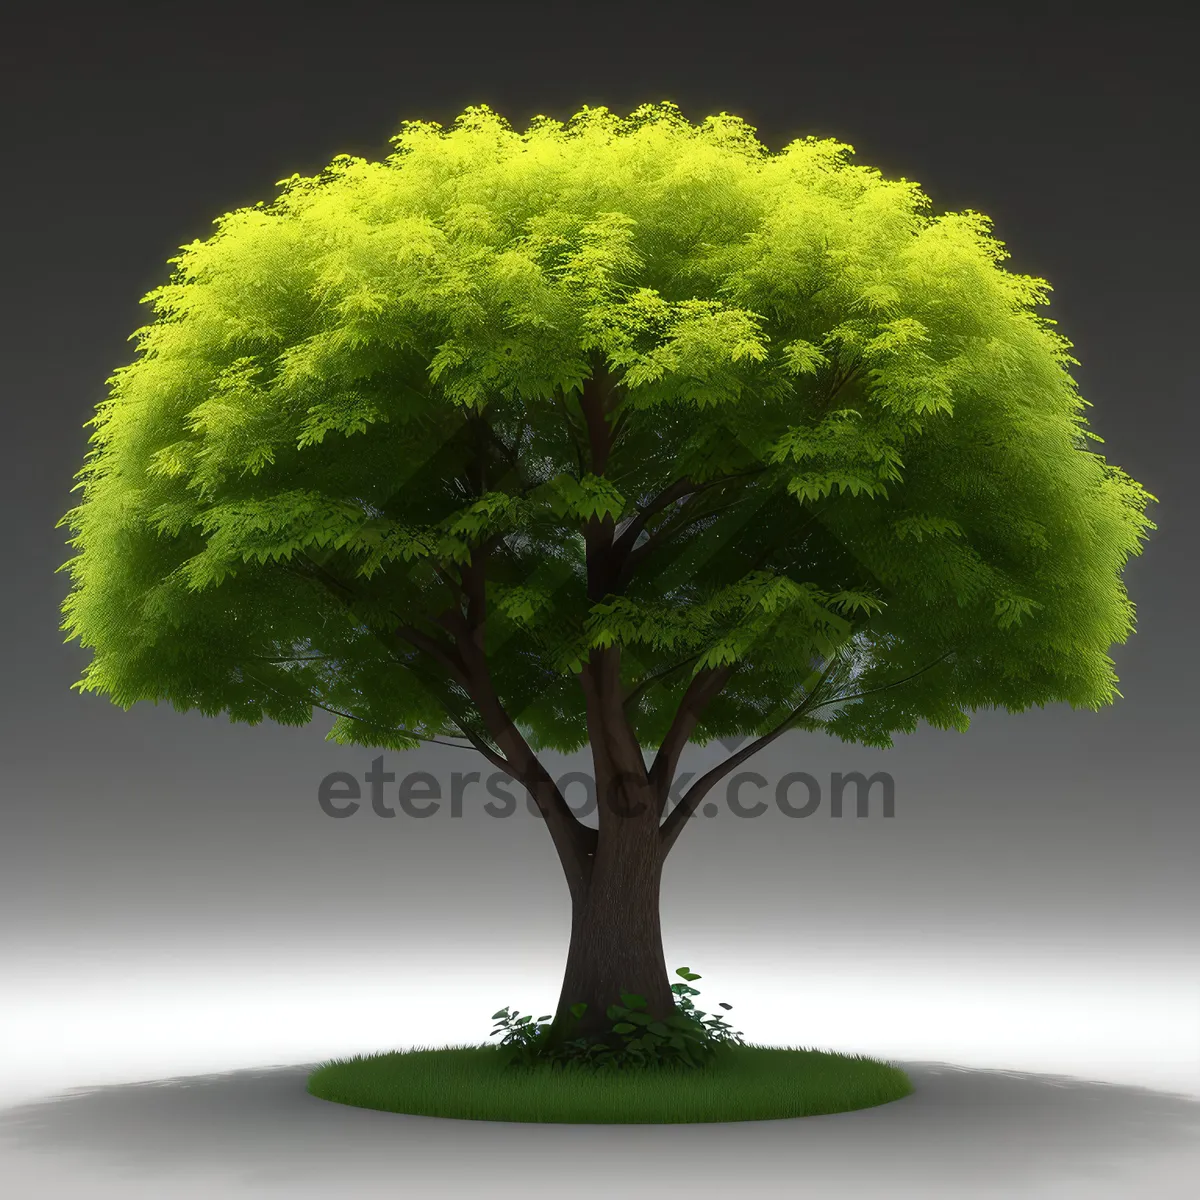 Picture of Majestic Oak Bonsai Surrounded by Lush Leaves